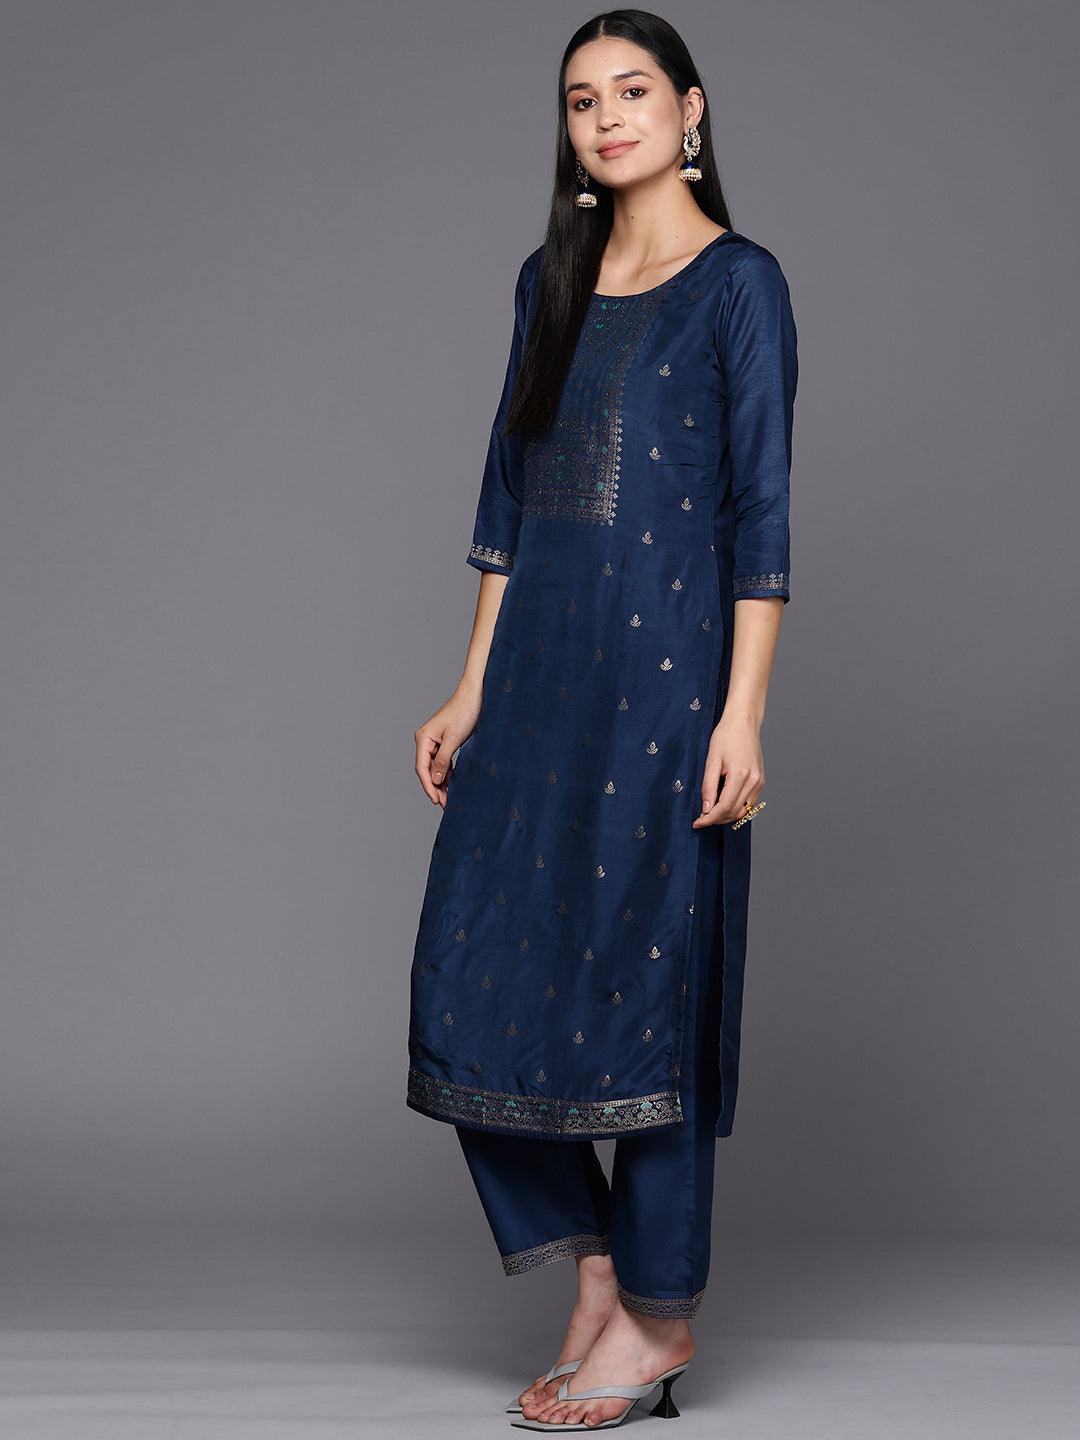 Blue Self Design Silk Blend Straight Suit Set With Trousers - Libas